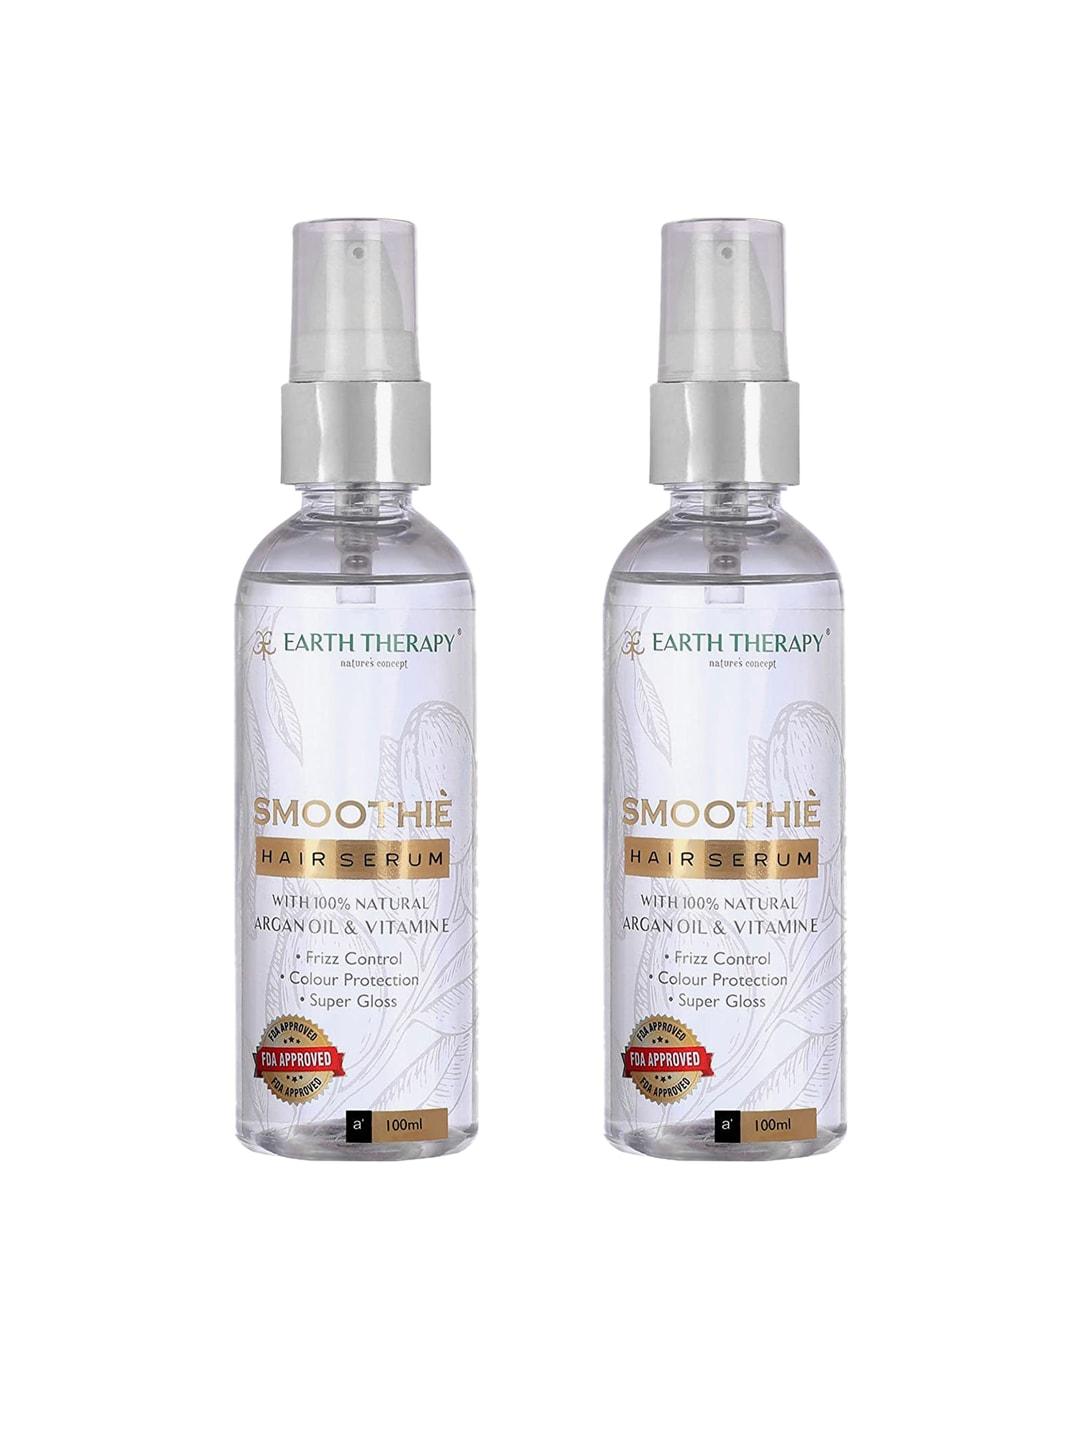 EARTH THERAPY Set of 2 Smoothie Hair Serum with Argan Oil & Vitamin E - 100 ml each